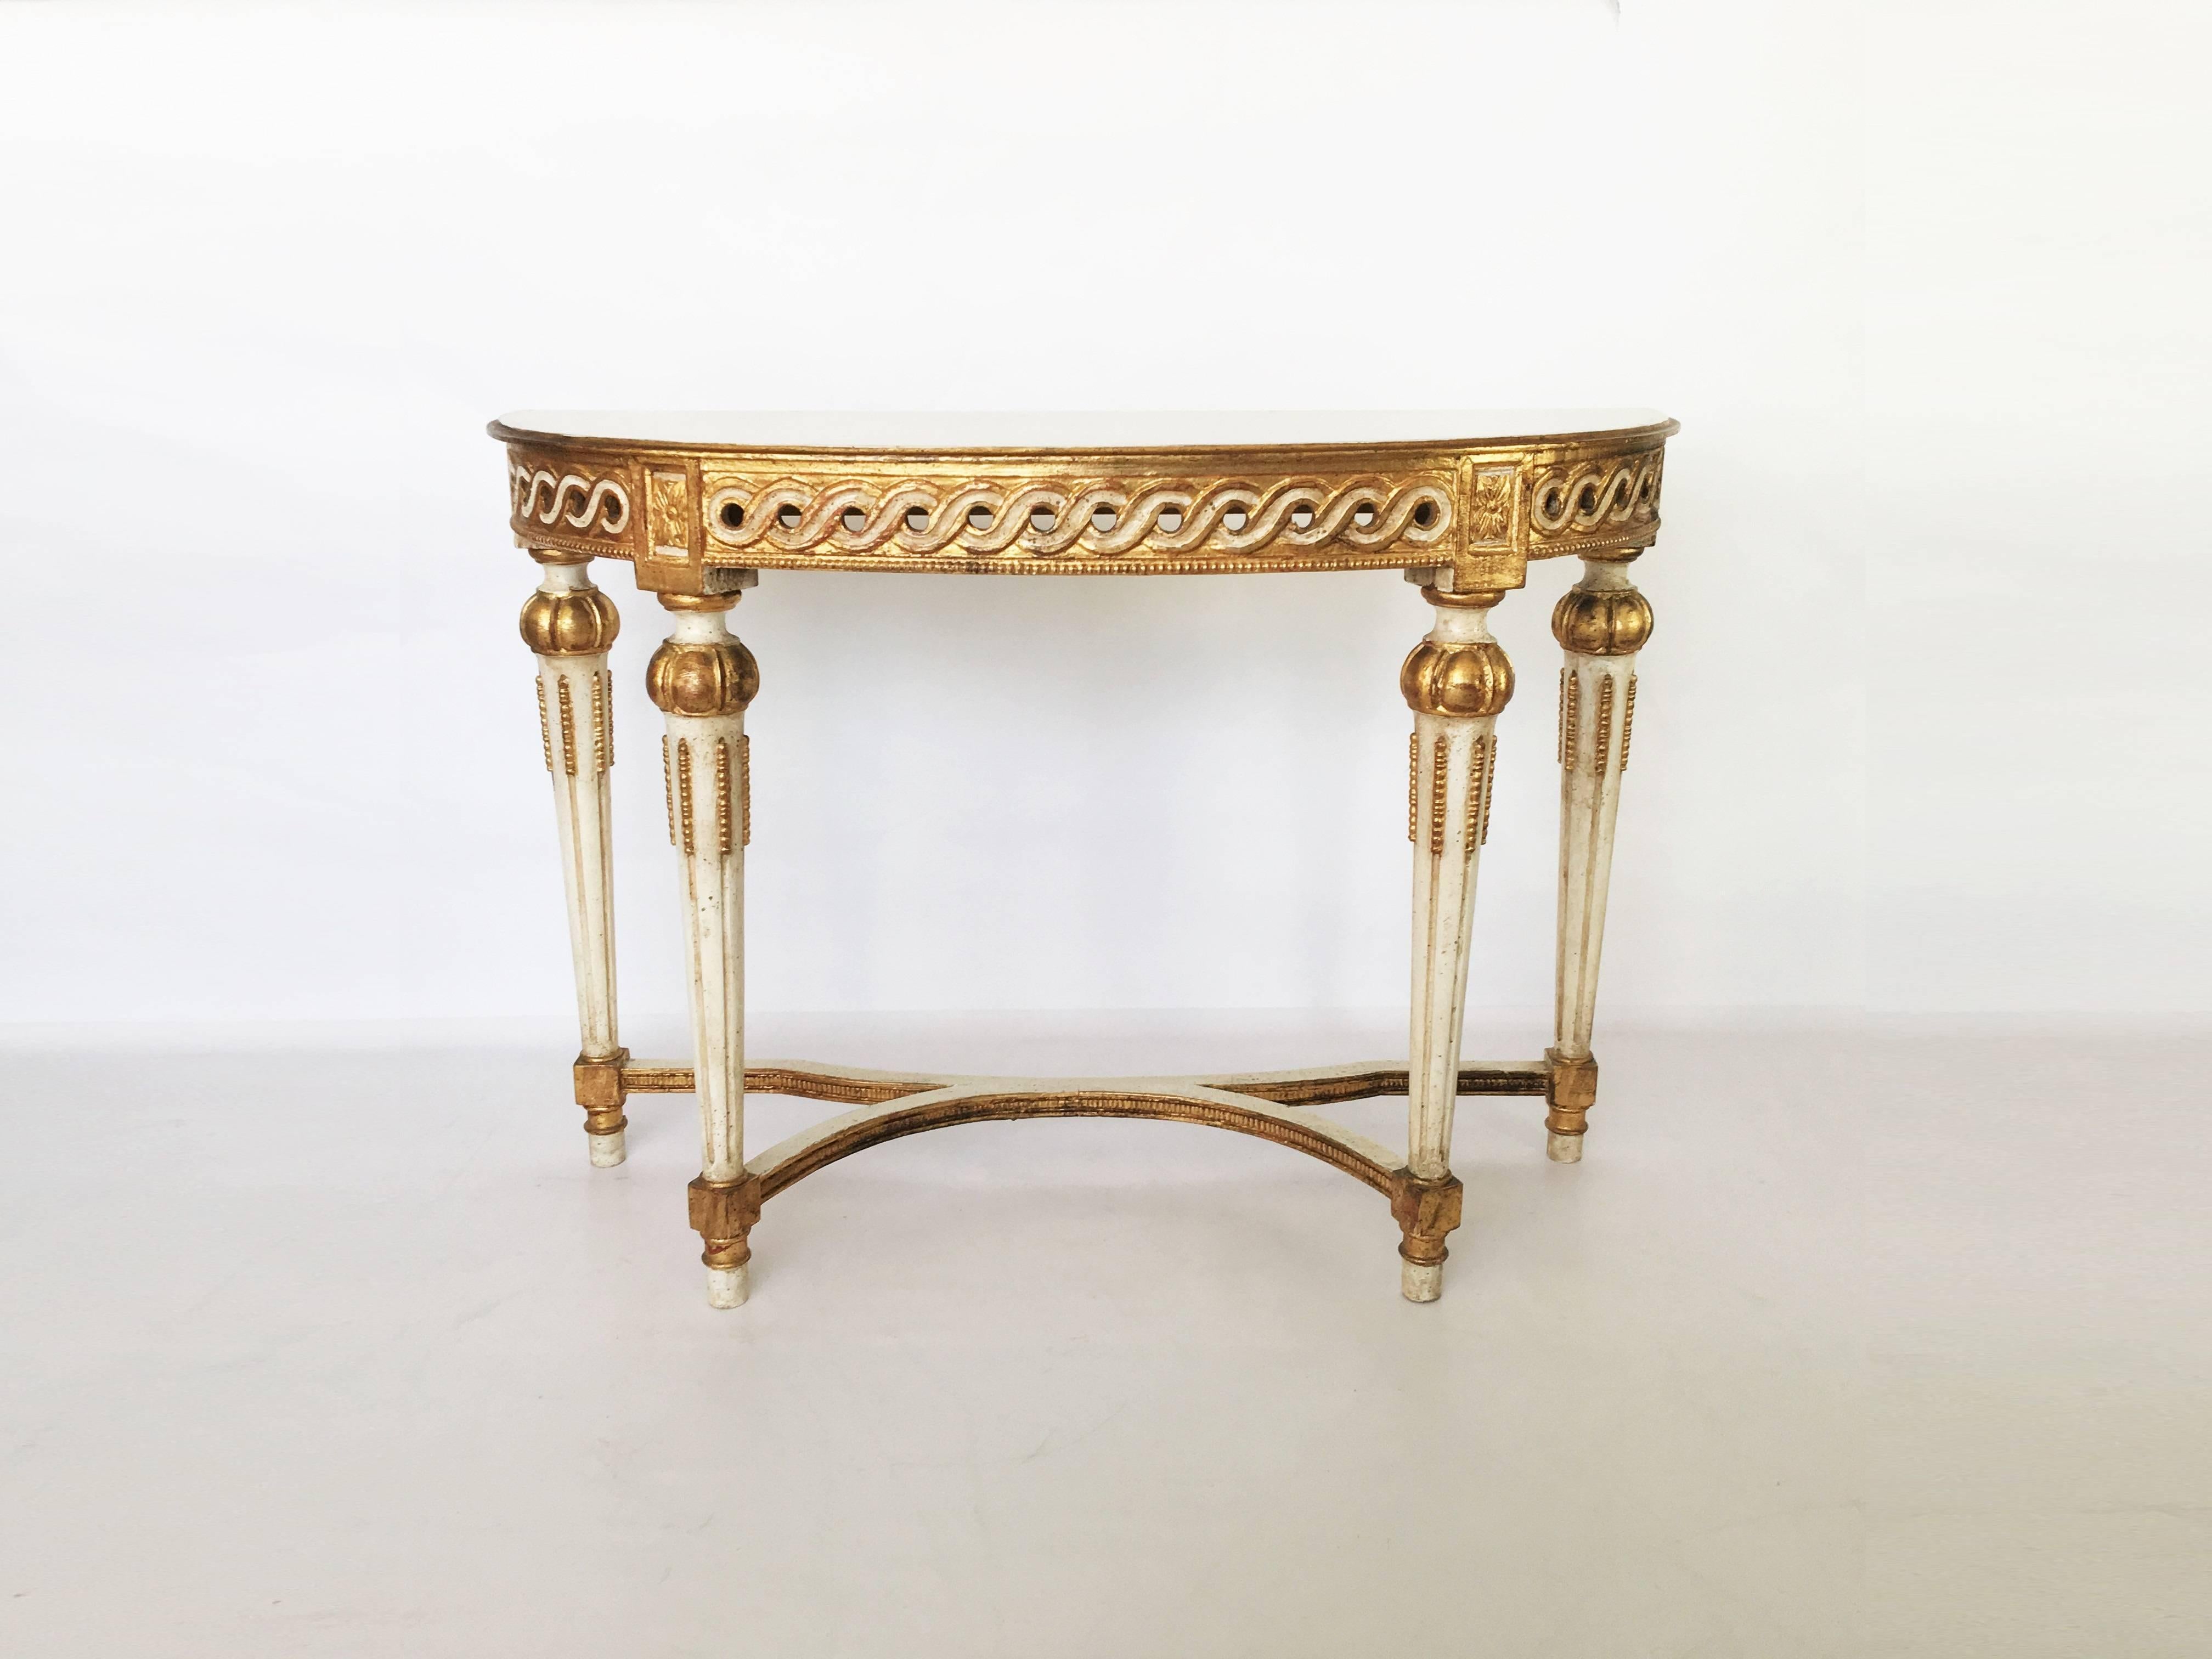 A fantastic example of neoclassic furniture! Early 20th century Italian hand carved, white painted and parcel-gilt console and mirror set. The console table featuring a conforming demilune top over a carved open work apron. Guilloche motif frieze